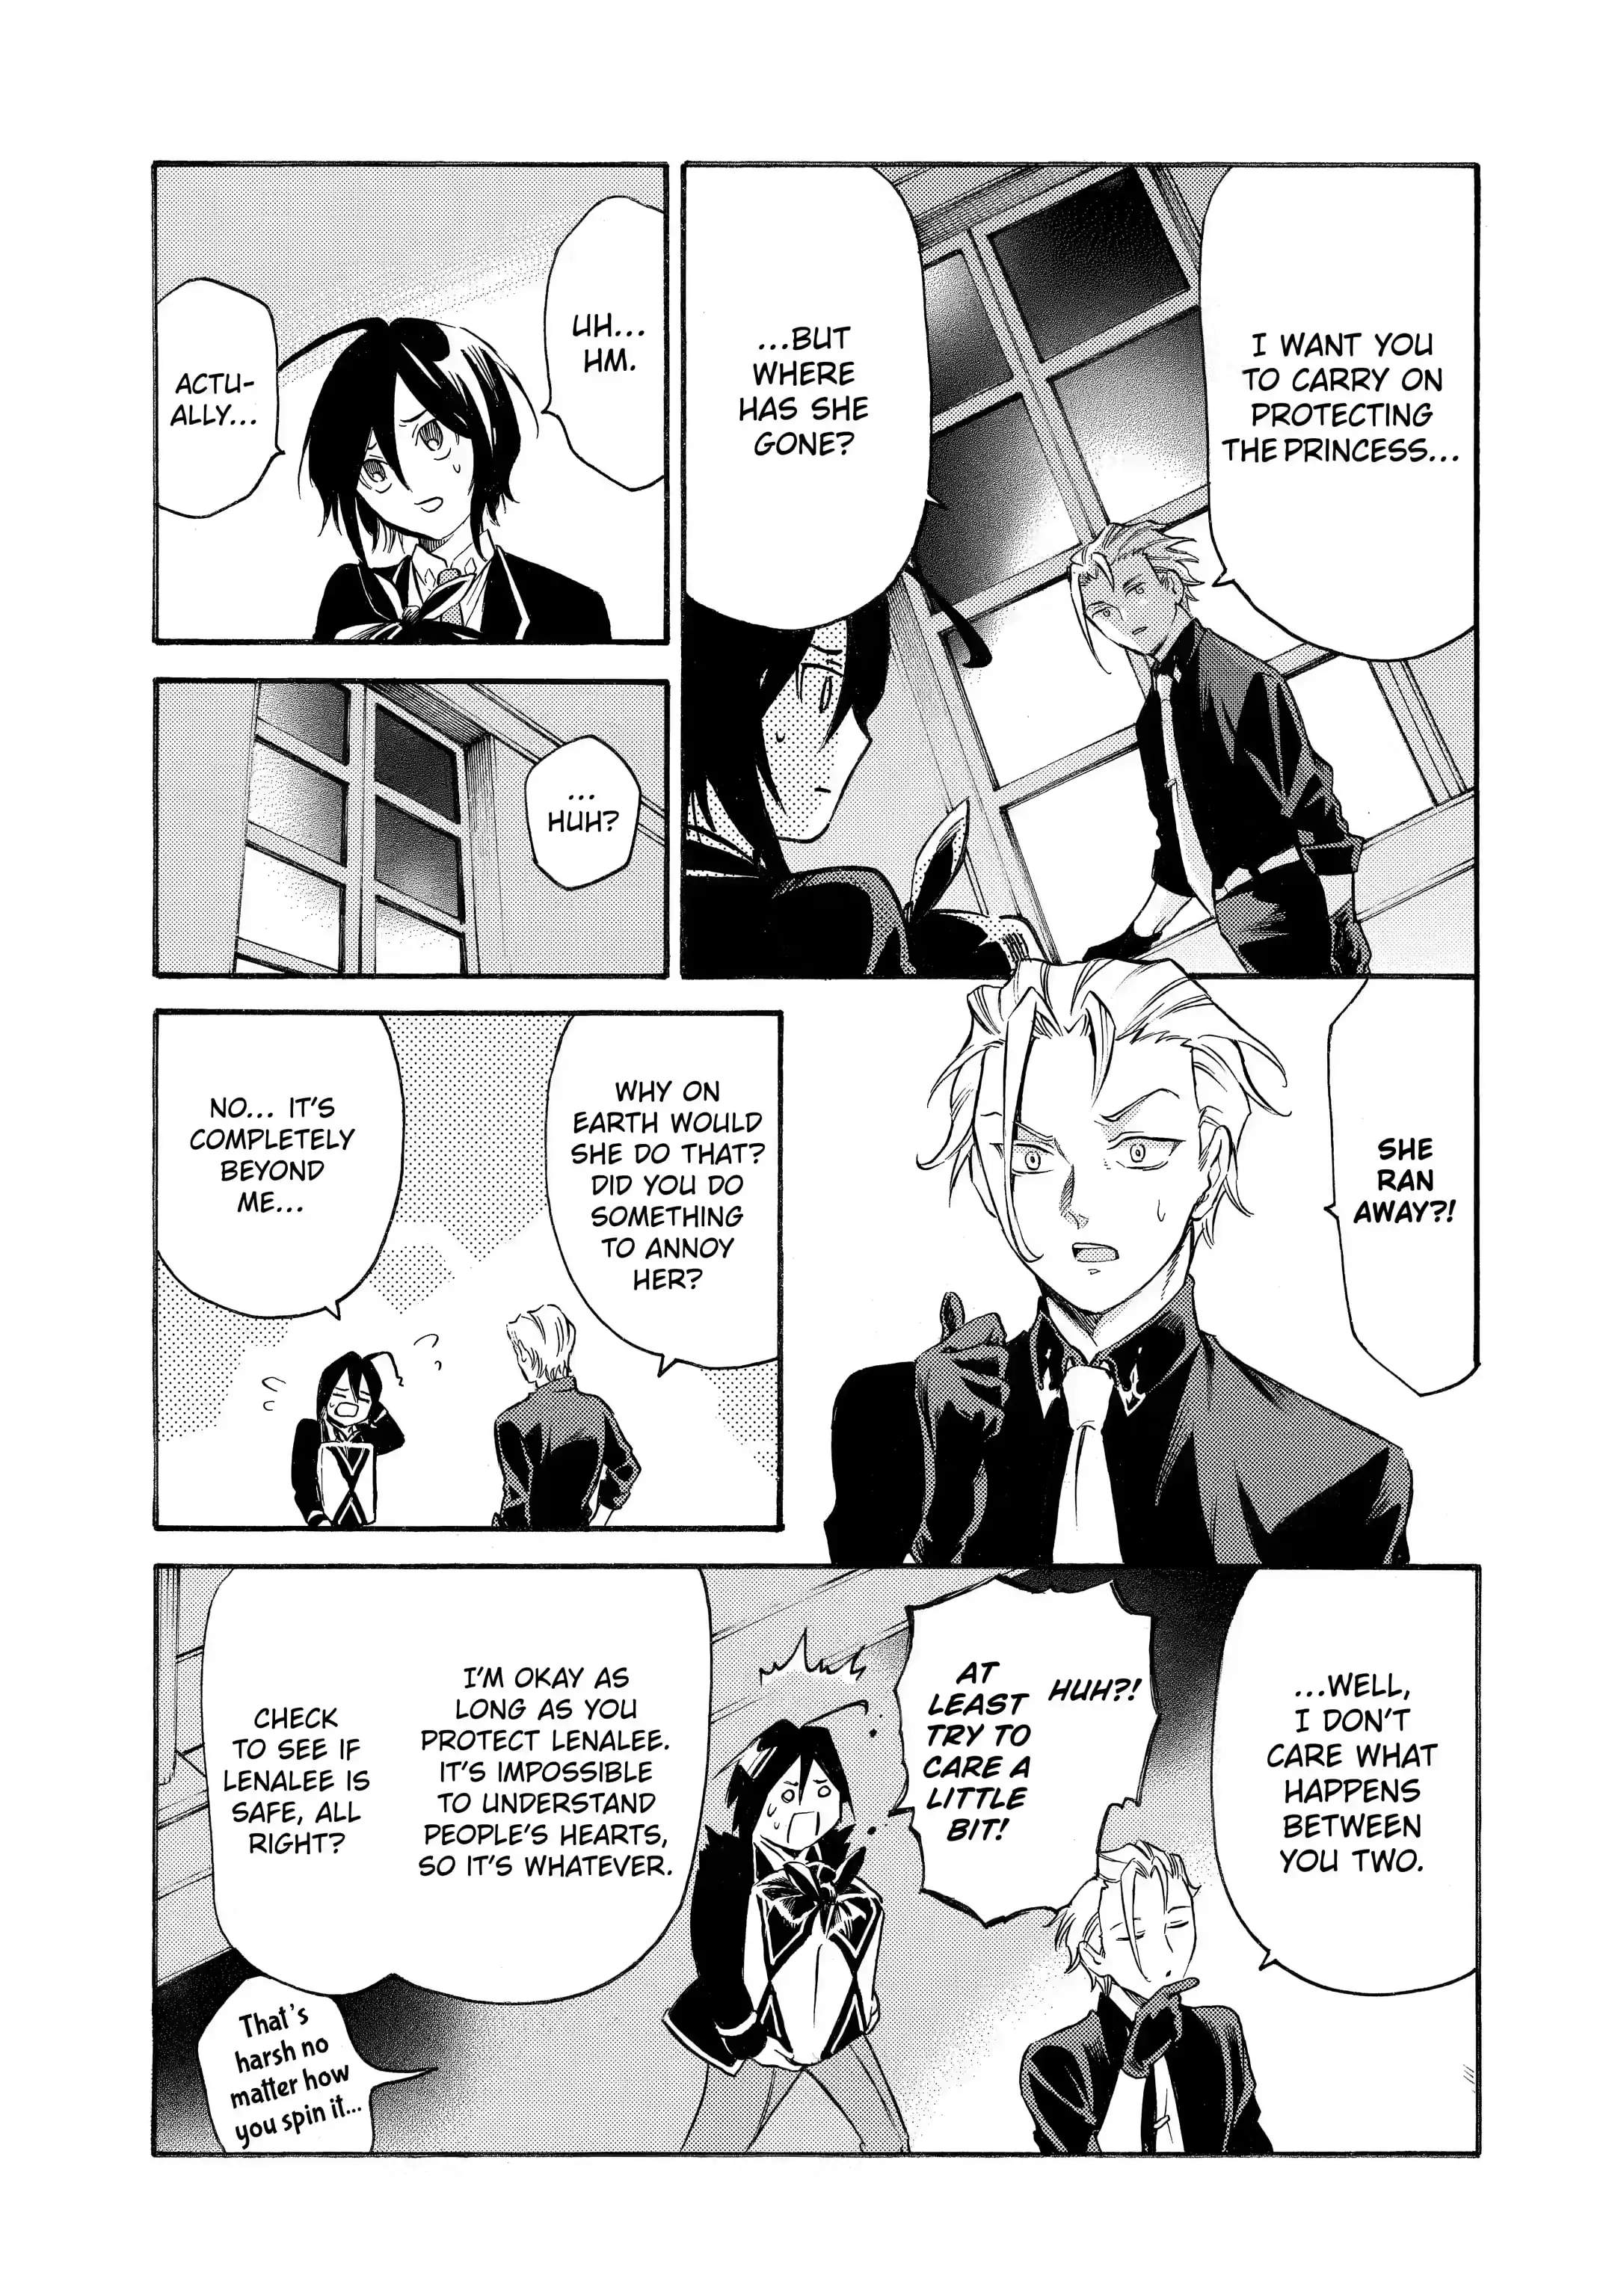 Reincarnation of the Unrivalled Time Mage: The Underachiever at the Magic Academy Turns Out to Be the Strongest Mage Who Controls Time! Chapter 6.1-eng-li - Page 2